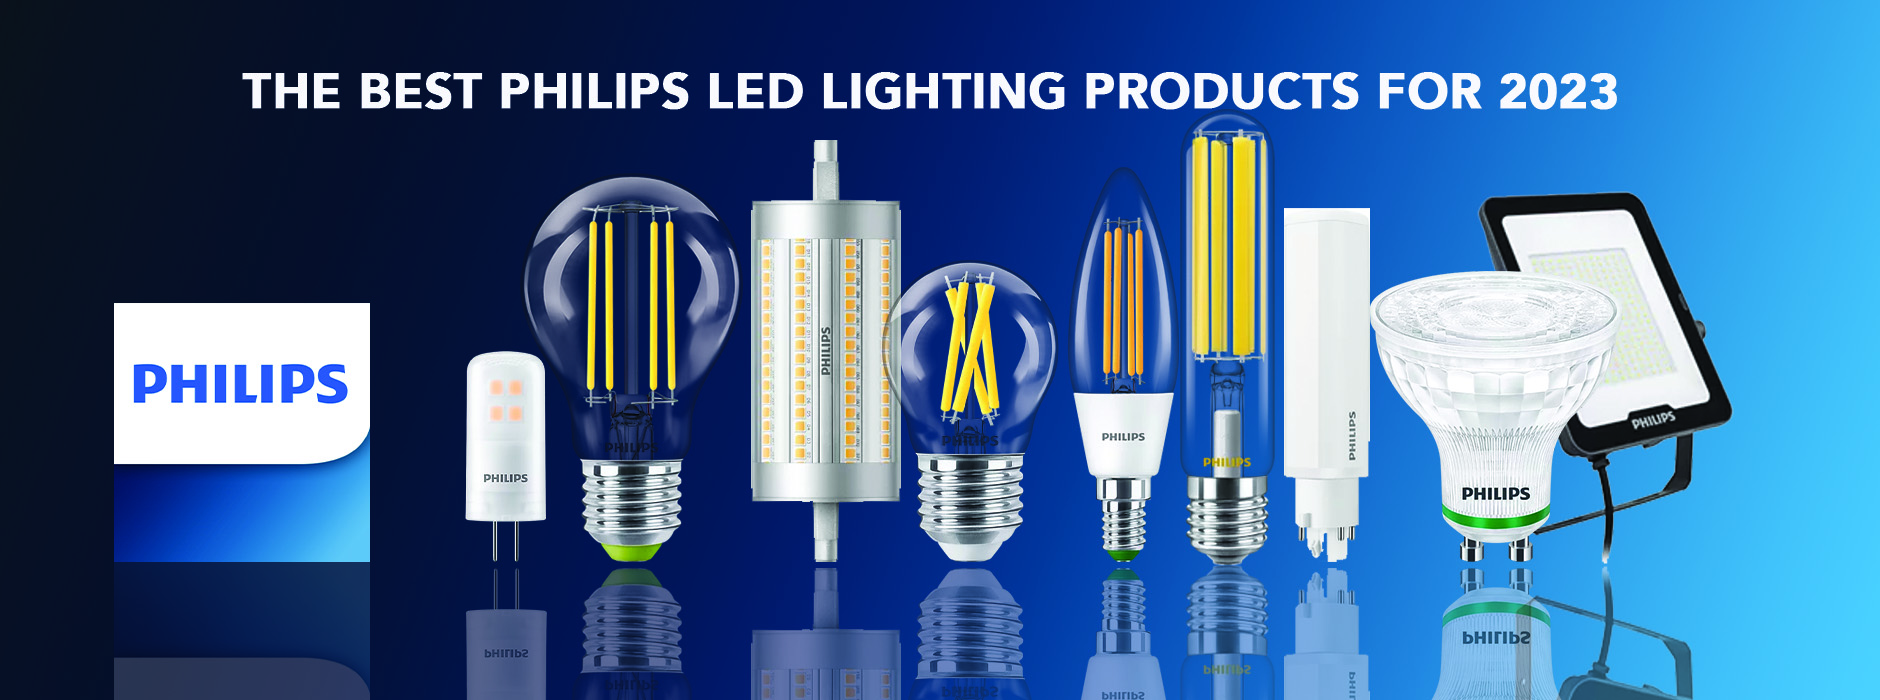 The Best LED Light Bulbs and Luminaires from Philips